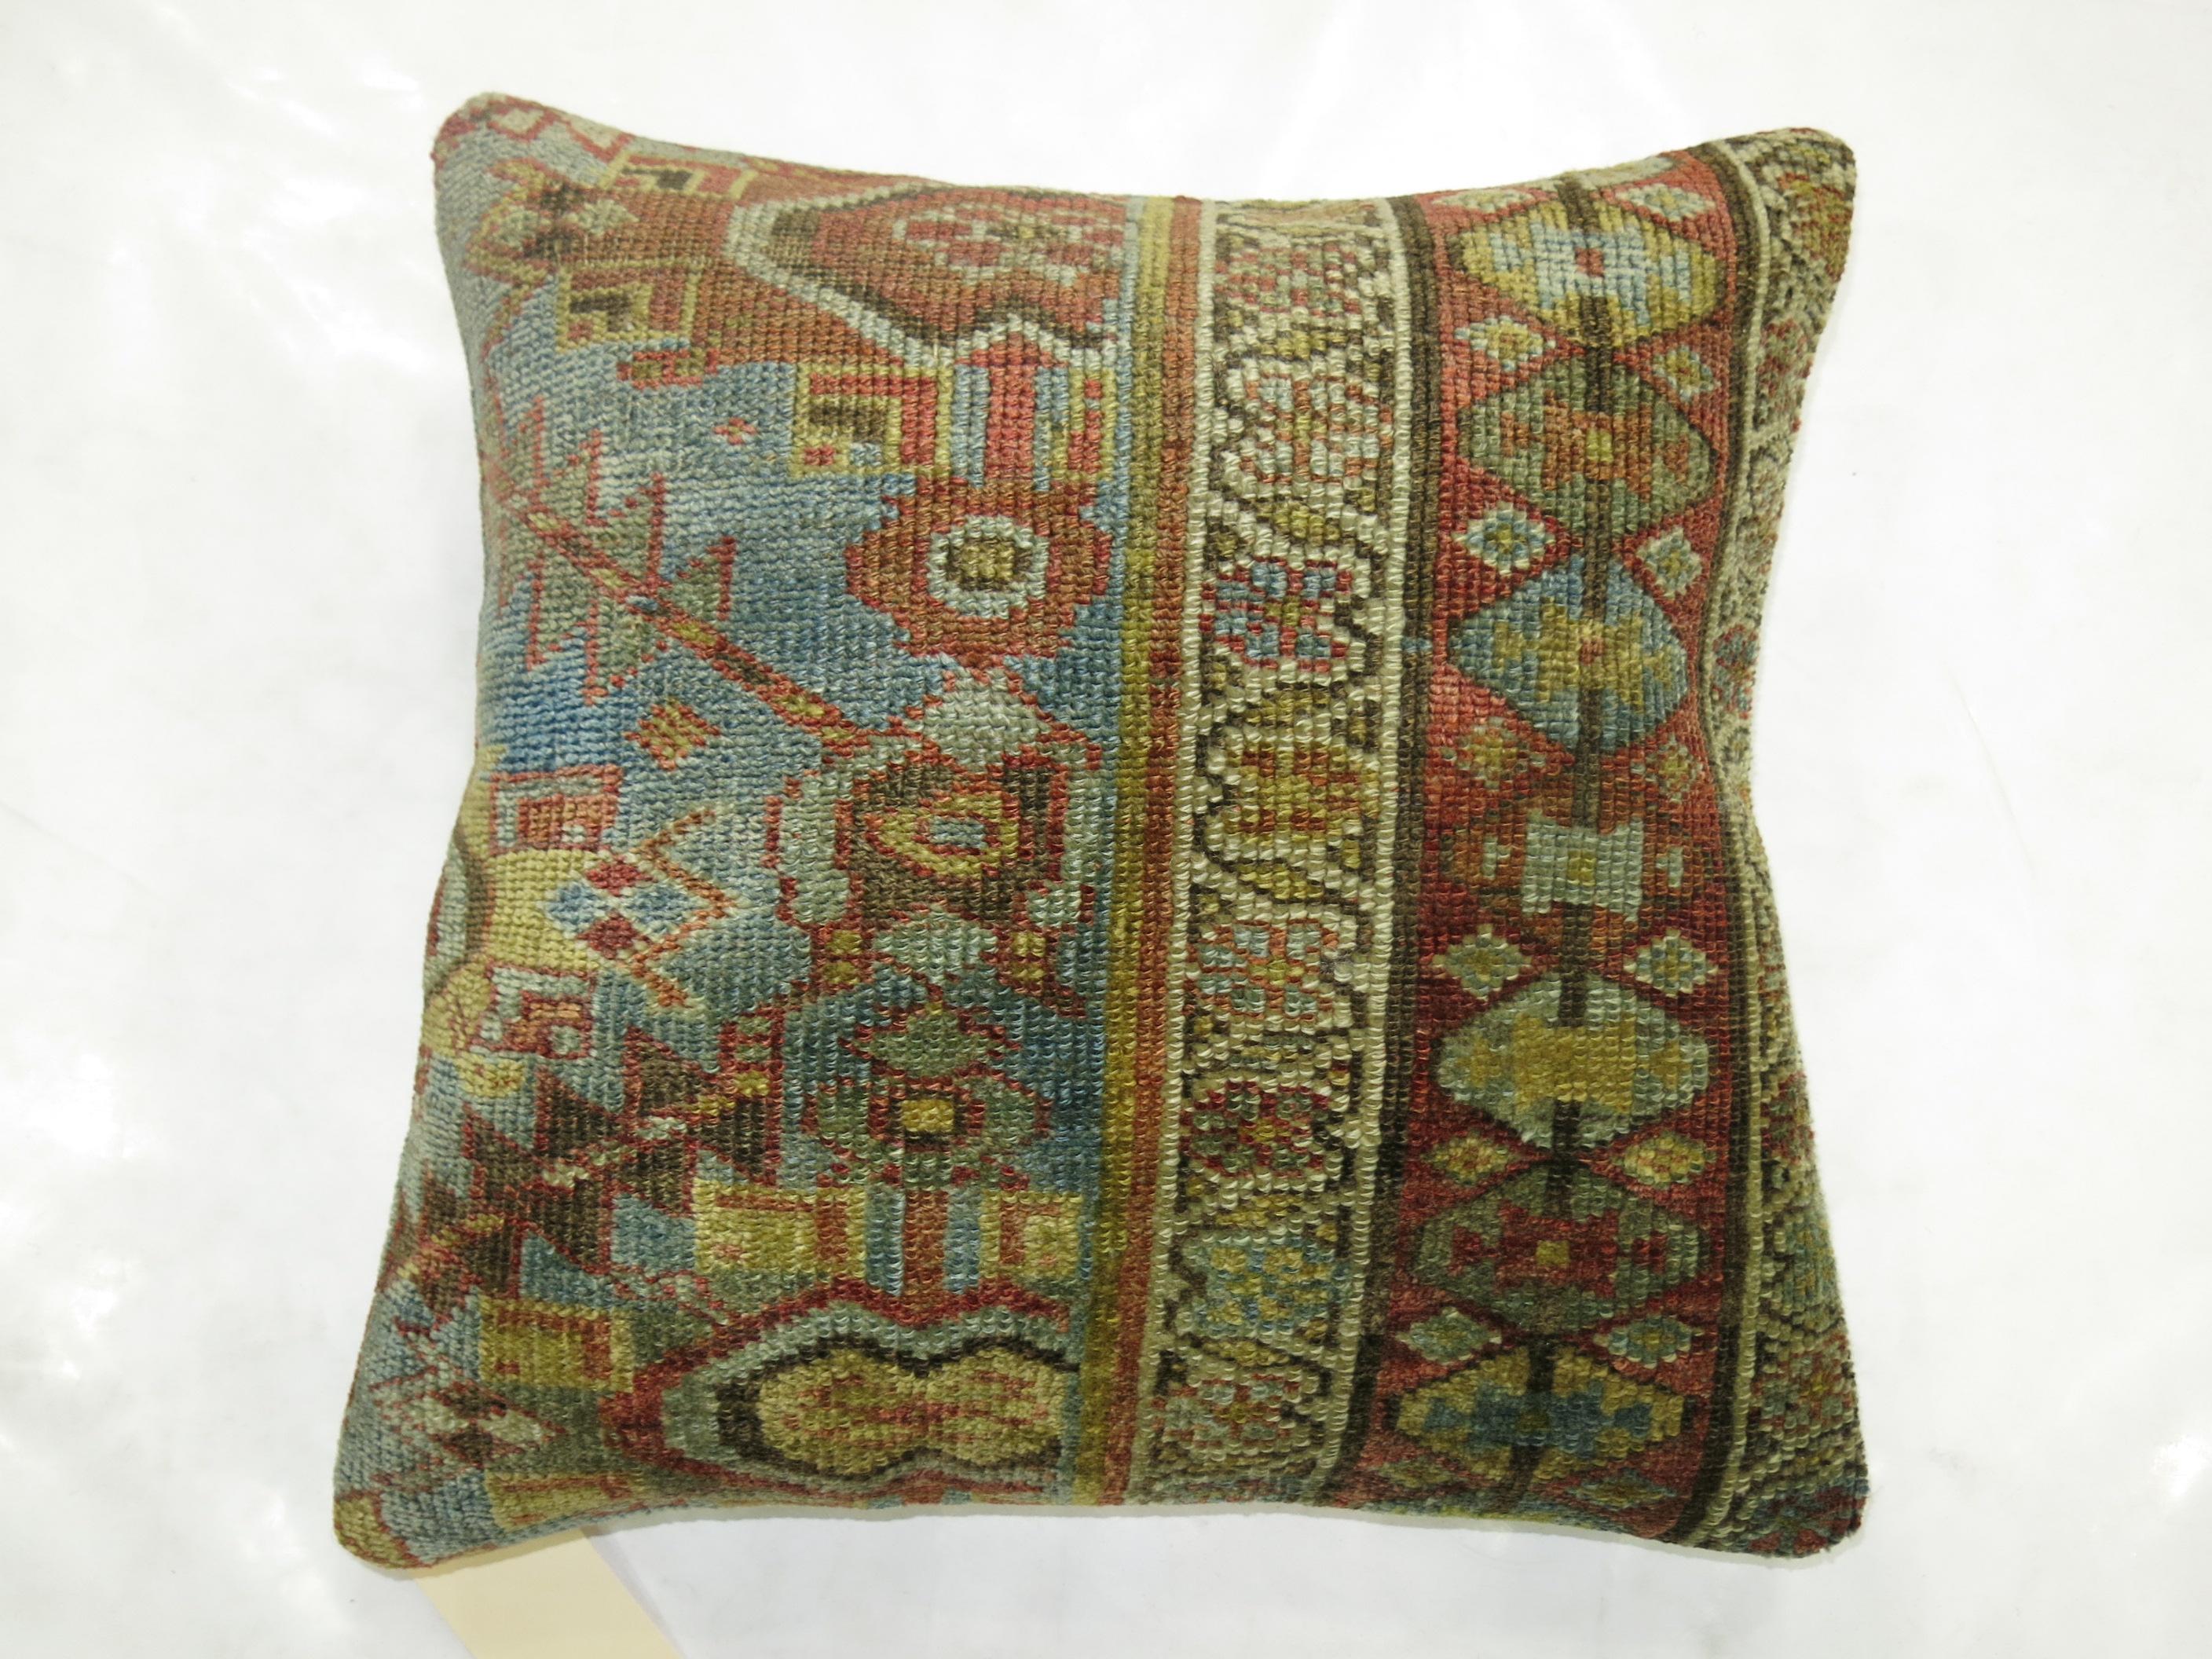 Pillow made from a Persian Malayer rug in dominant light blue and rust accents.

Measures: 19